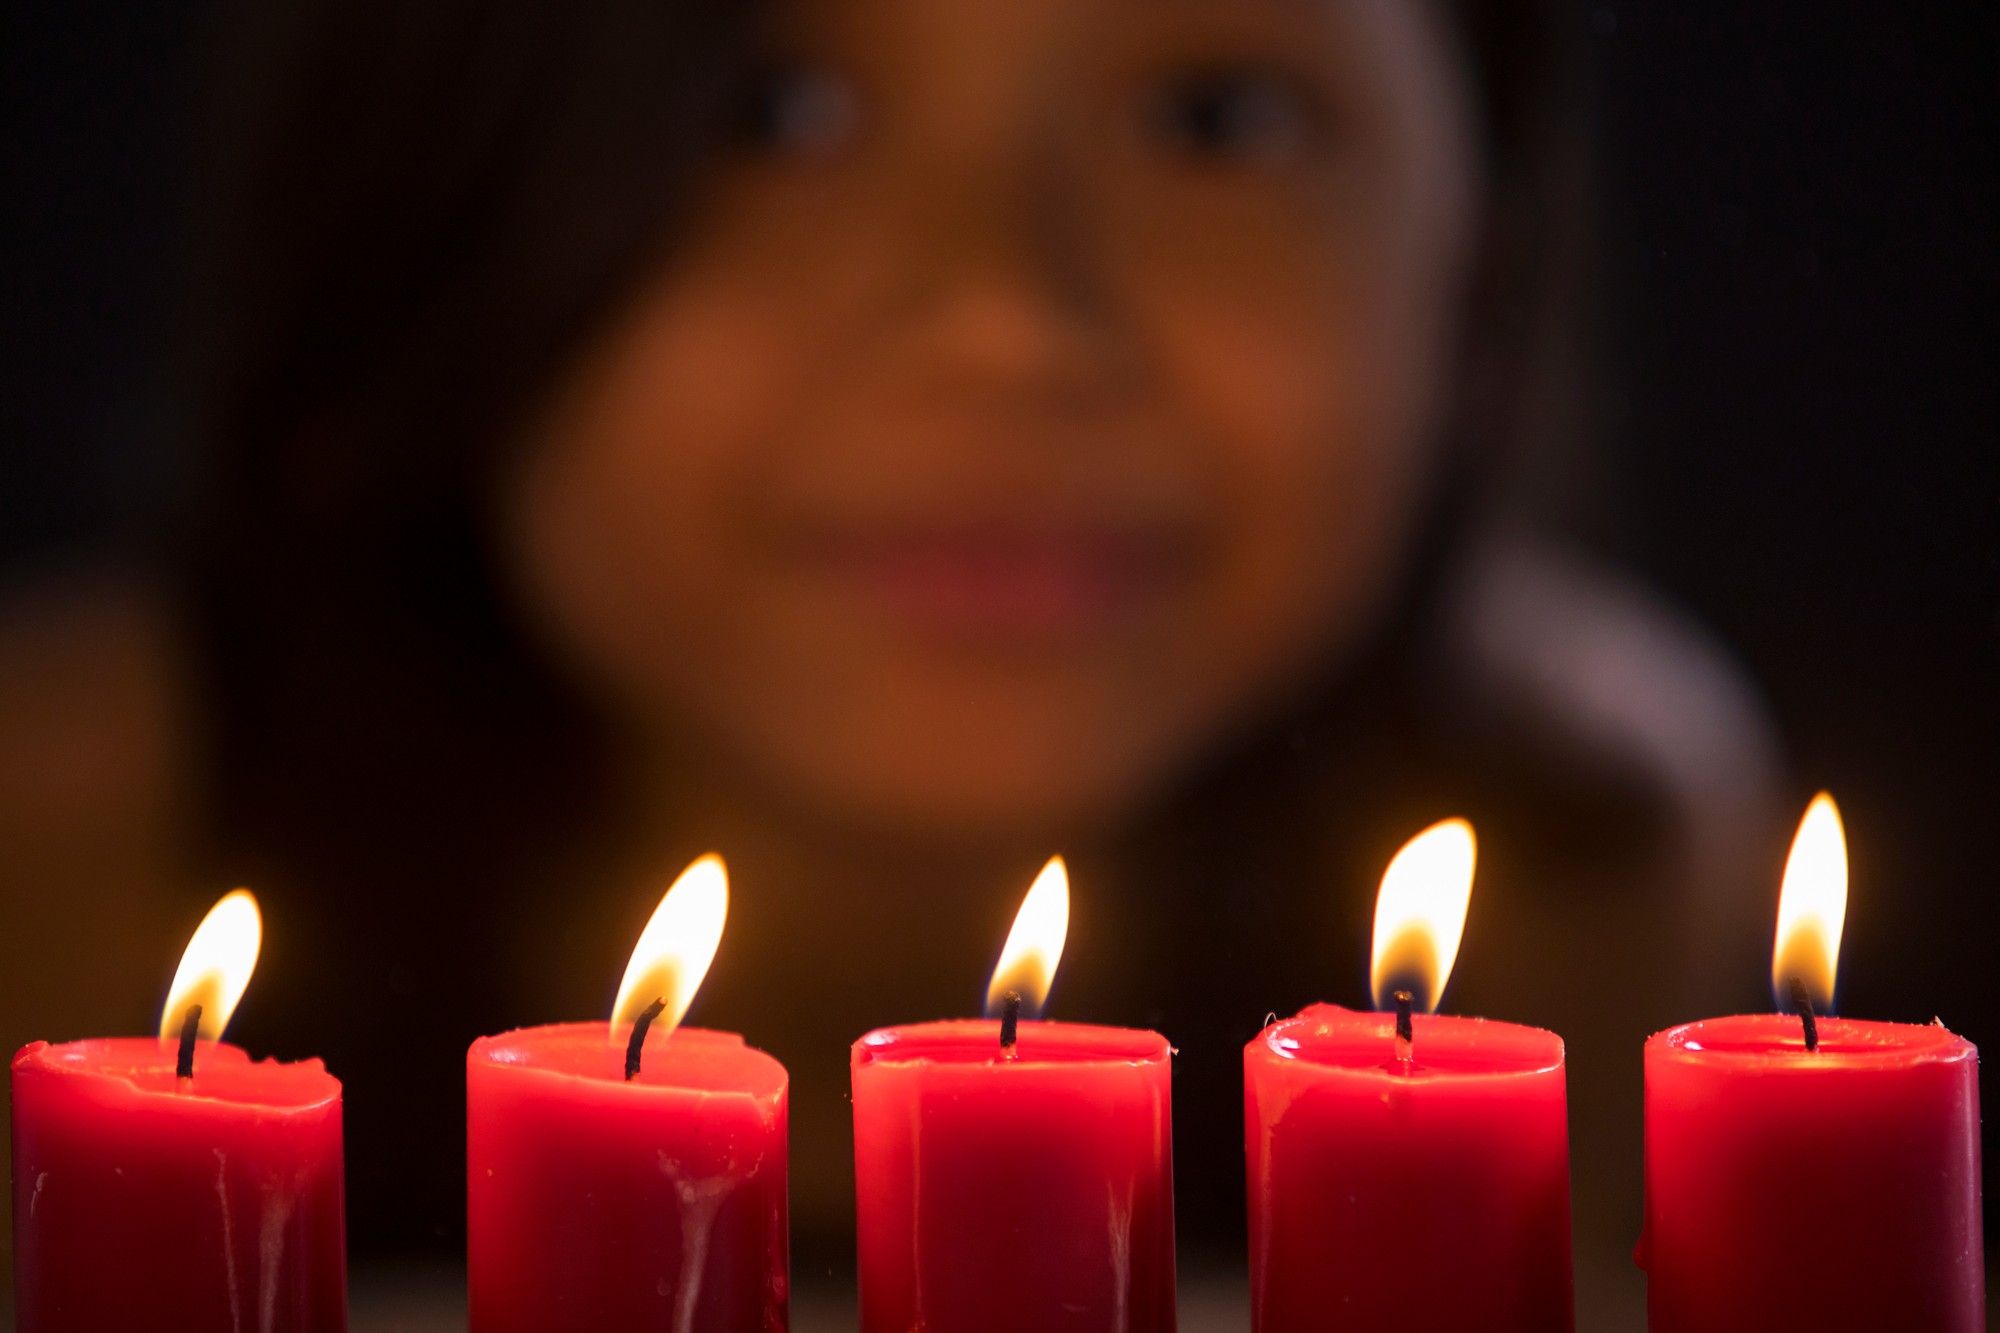 Walmart Mainstay candles are the subject of a defective product lawsuit.